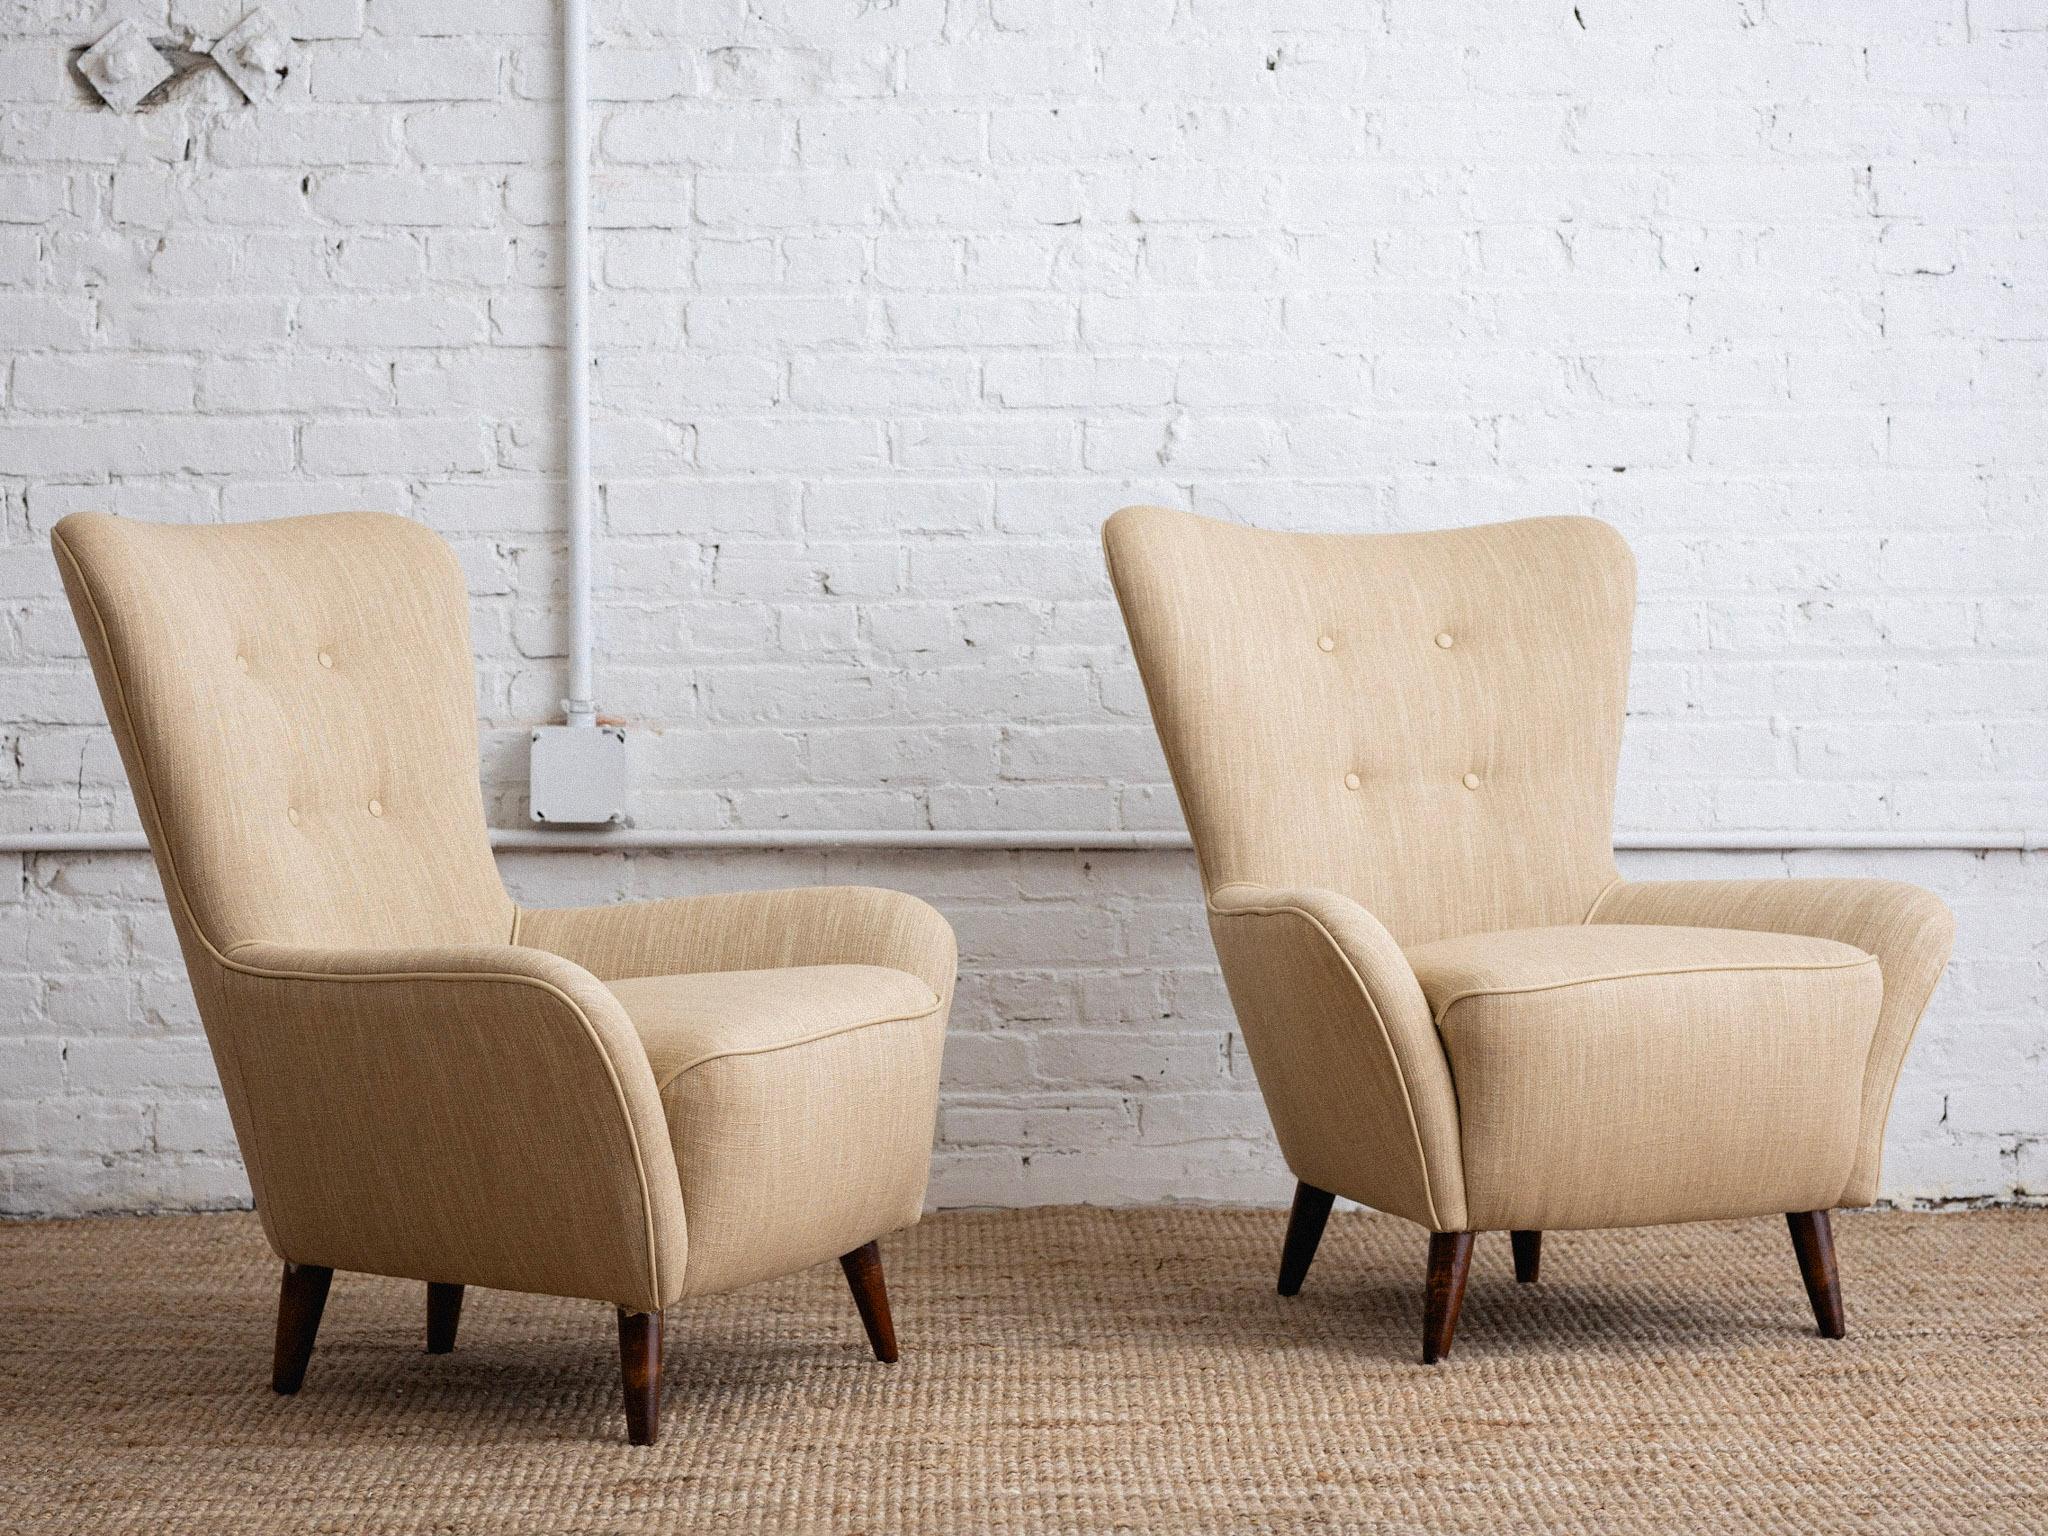 Mid-Century Modern Petite Italian Armchairs in Linen and Leather - a Pair For Sale